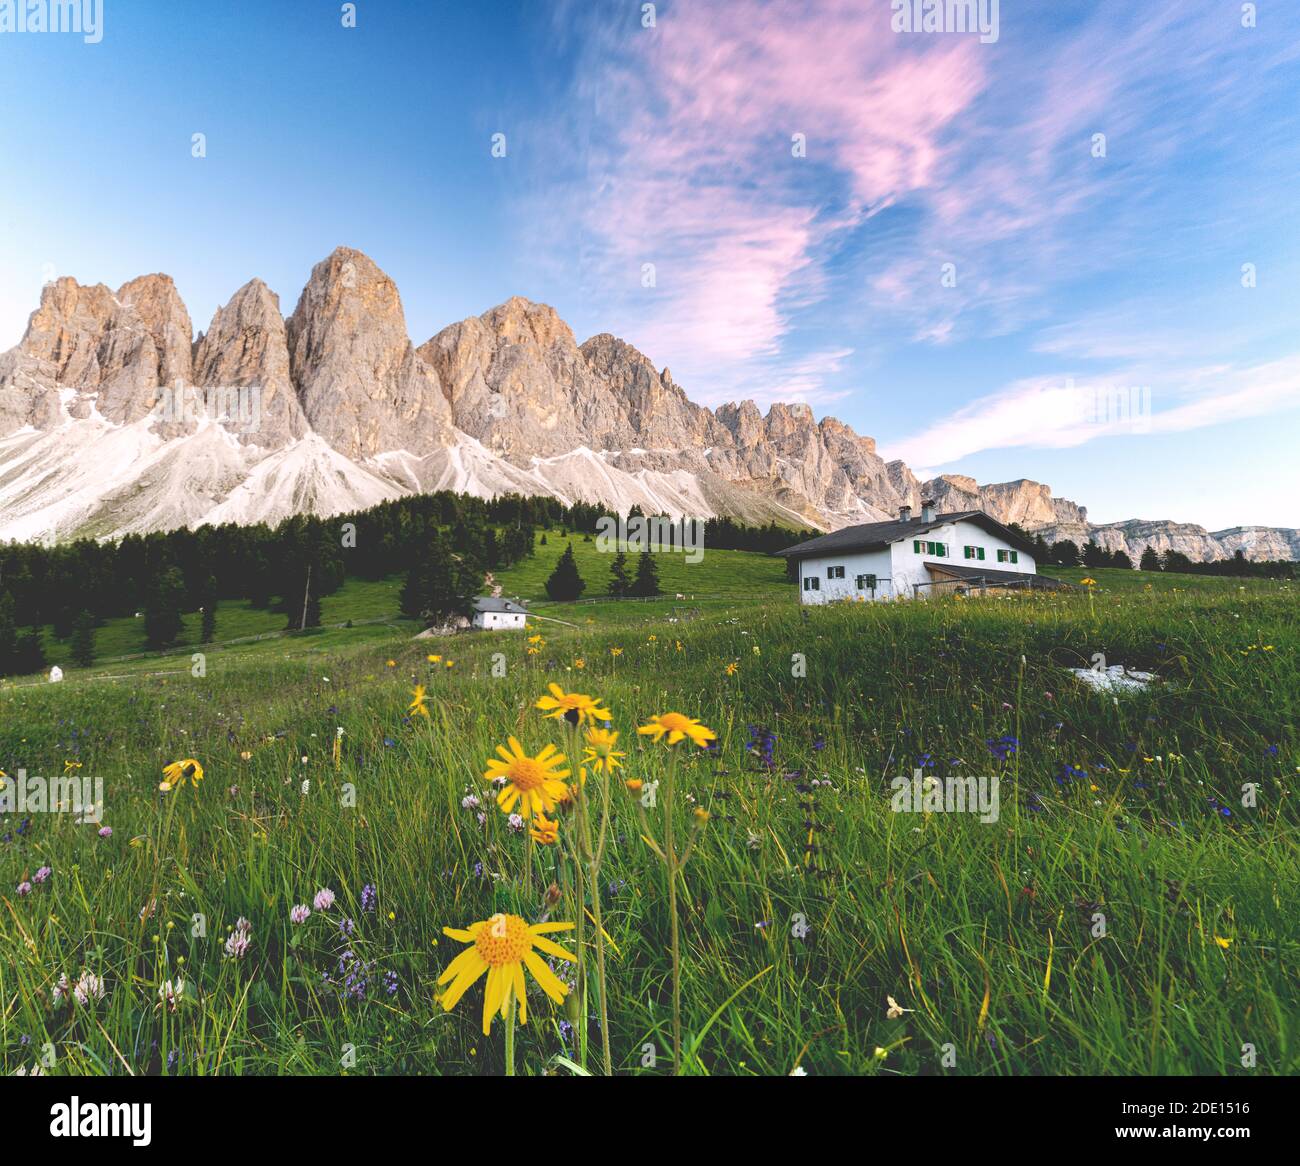 Wildflowers surrounding Glatsch Alm hut with the Odle in the background at sunset, Val di Funes, South Tyrol, Dolomites, Italy, Europe Stock Photo